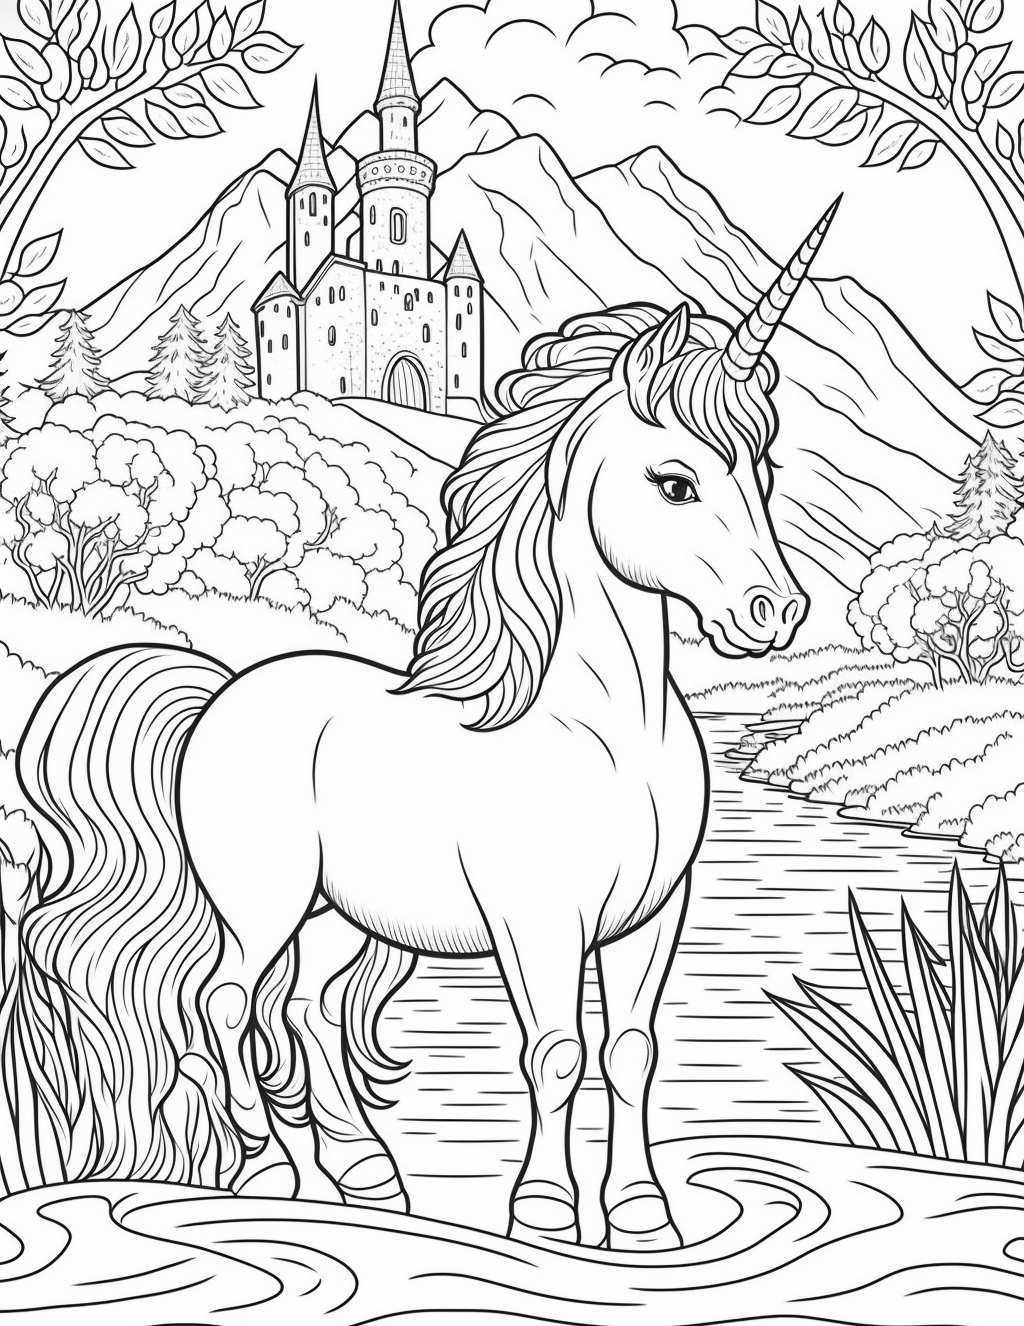 56 Cute Unicorn Printable Coloring Pages for Kids, Printable PDF File Instant Download - raspiee